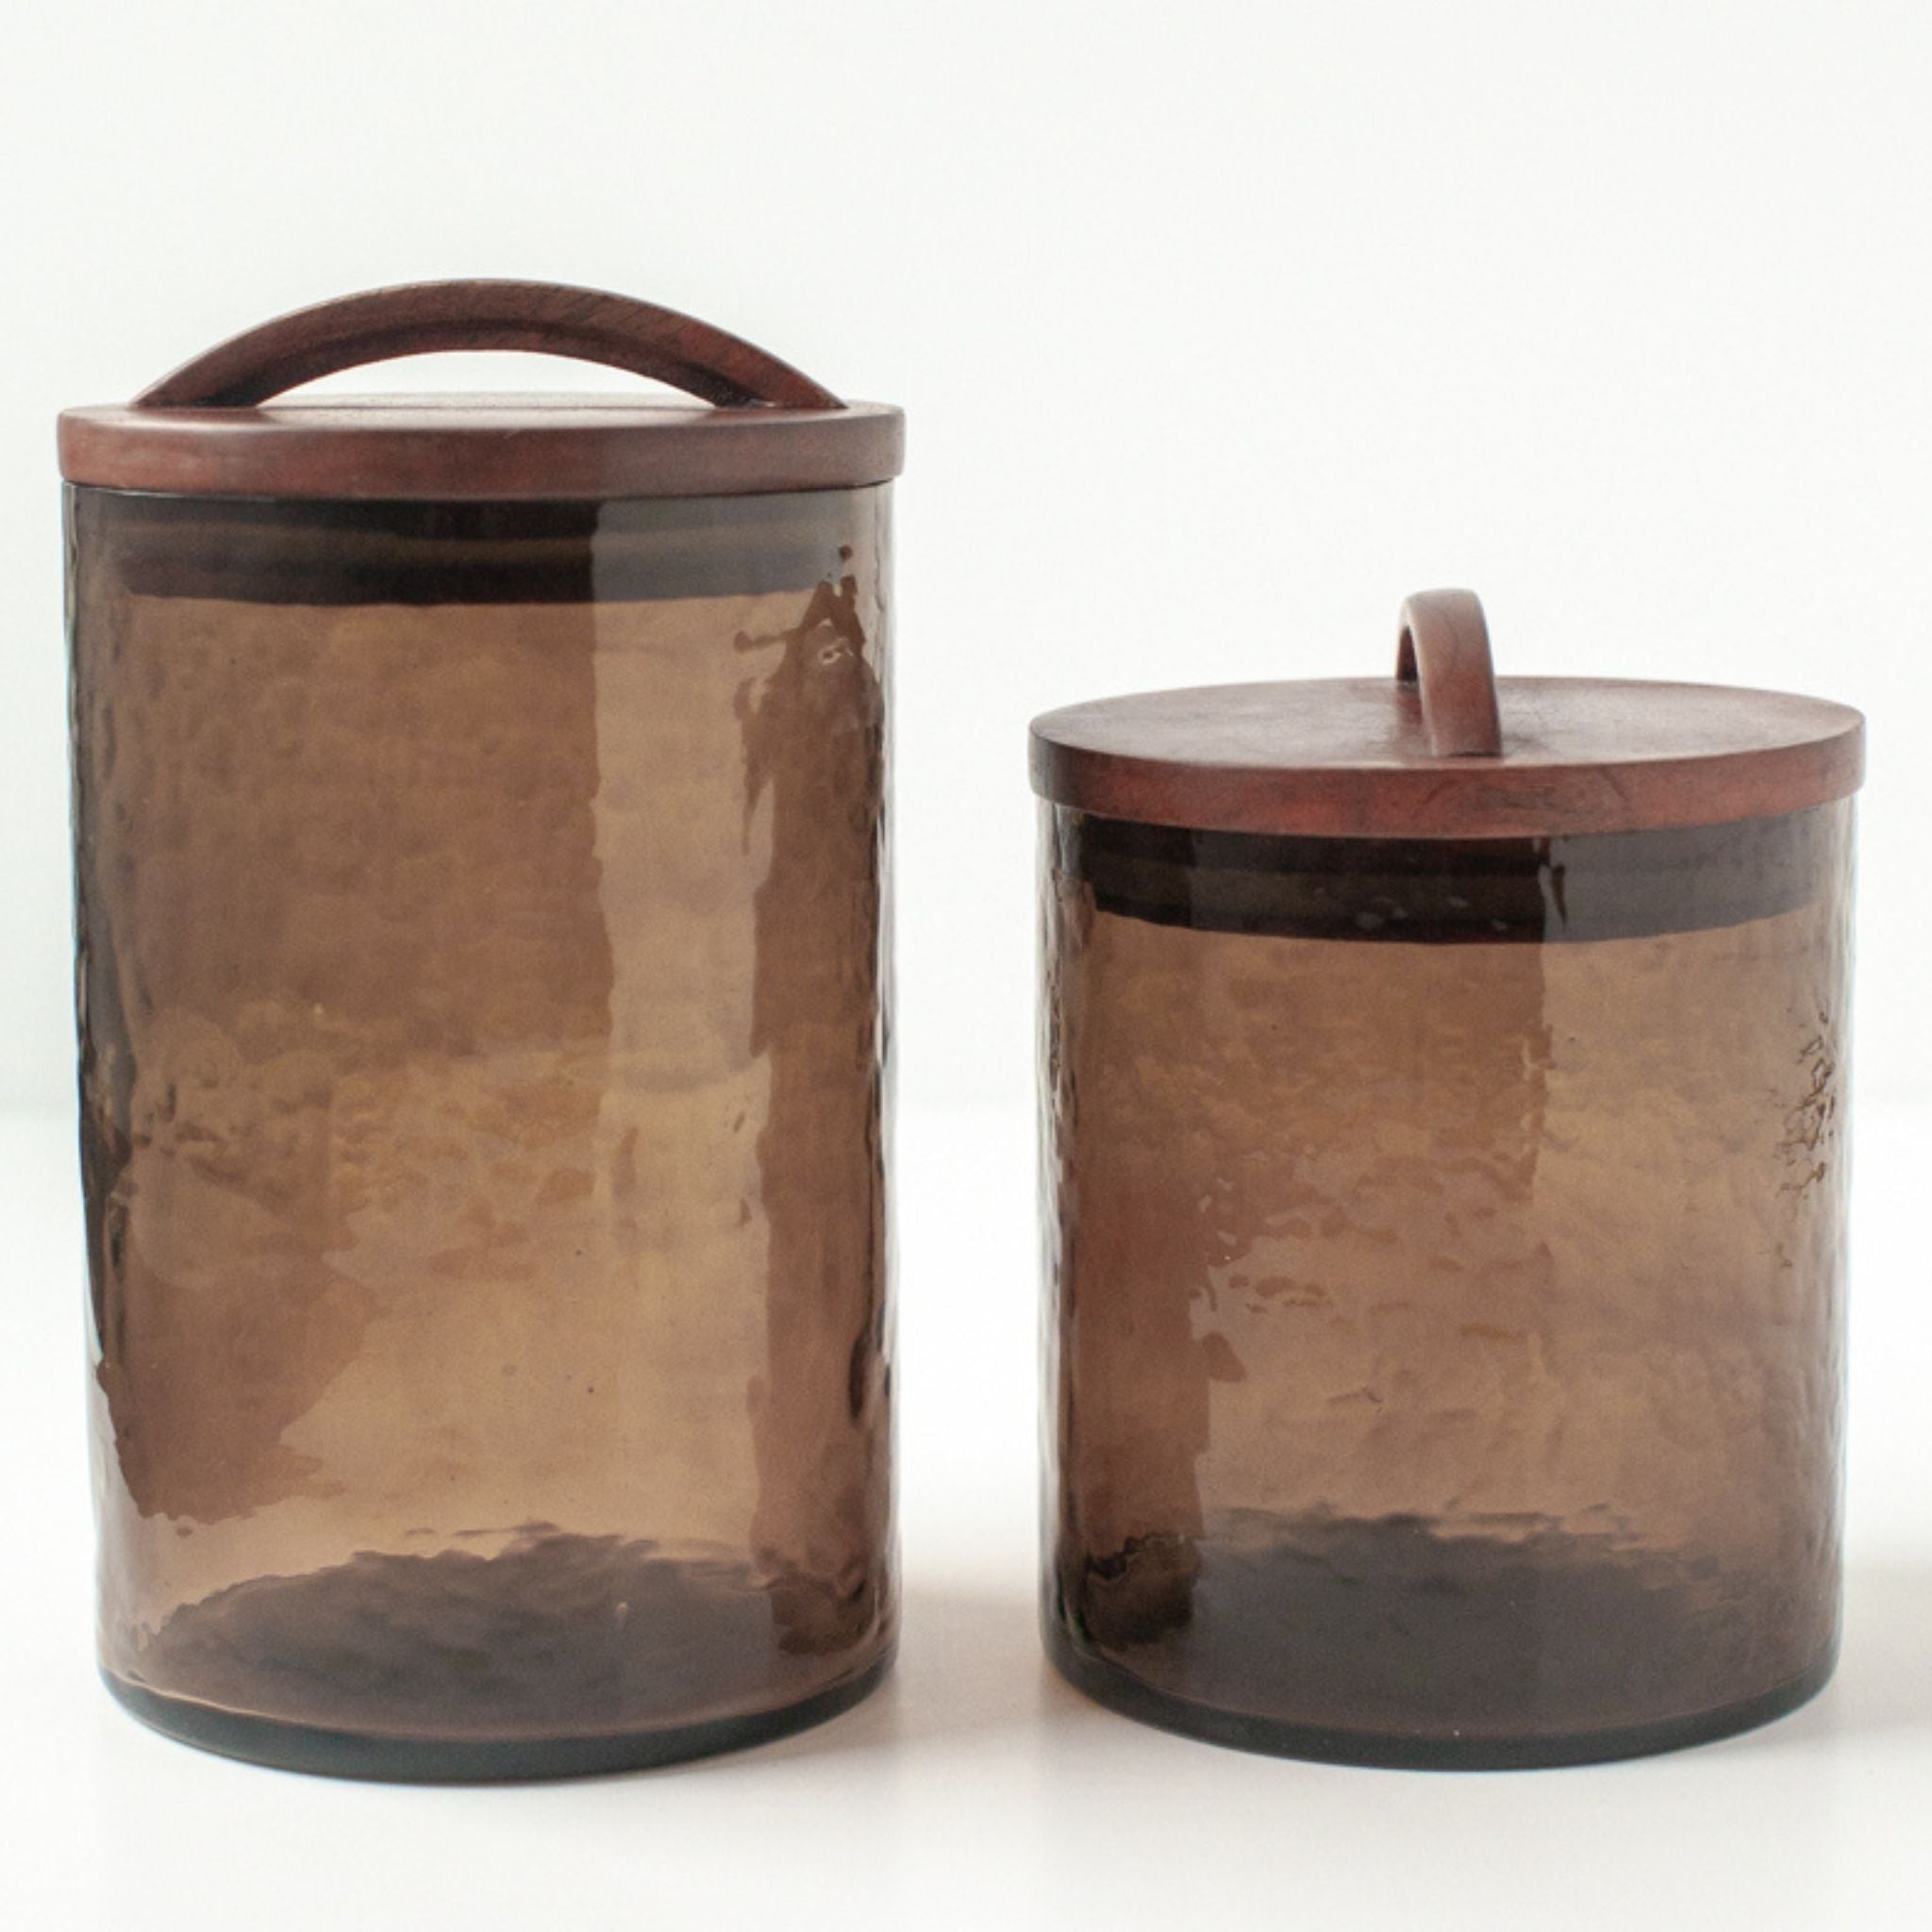 Handblown Hammered Glass Canisters